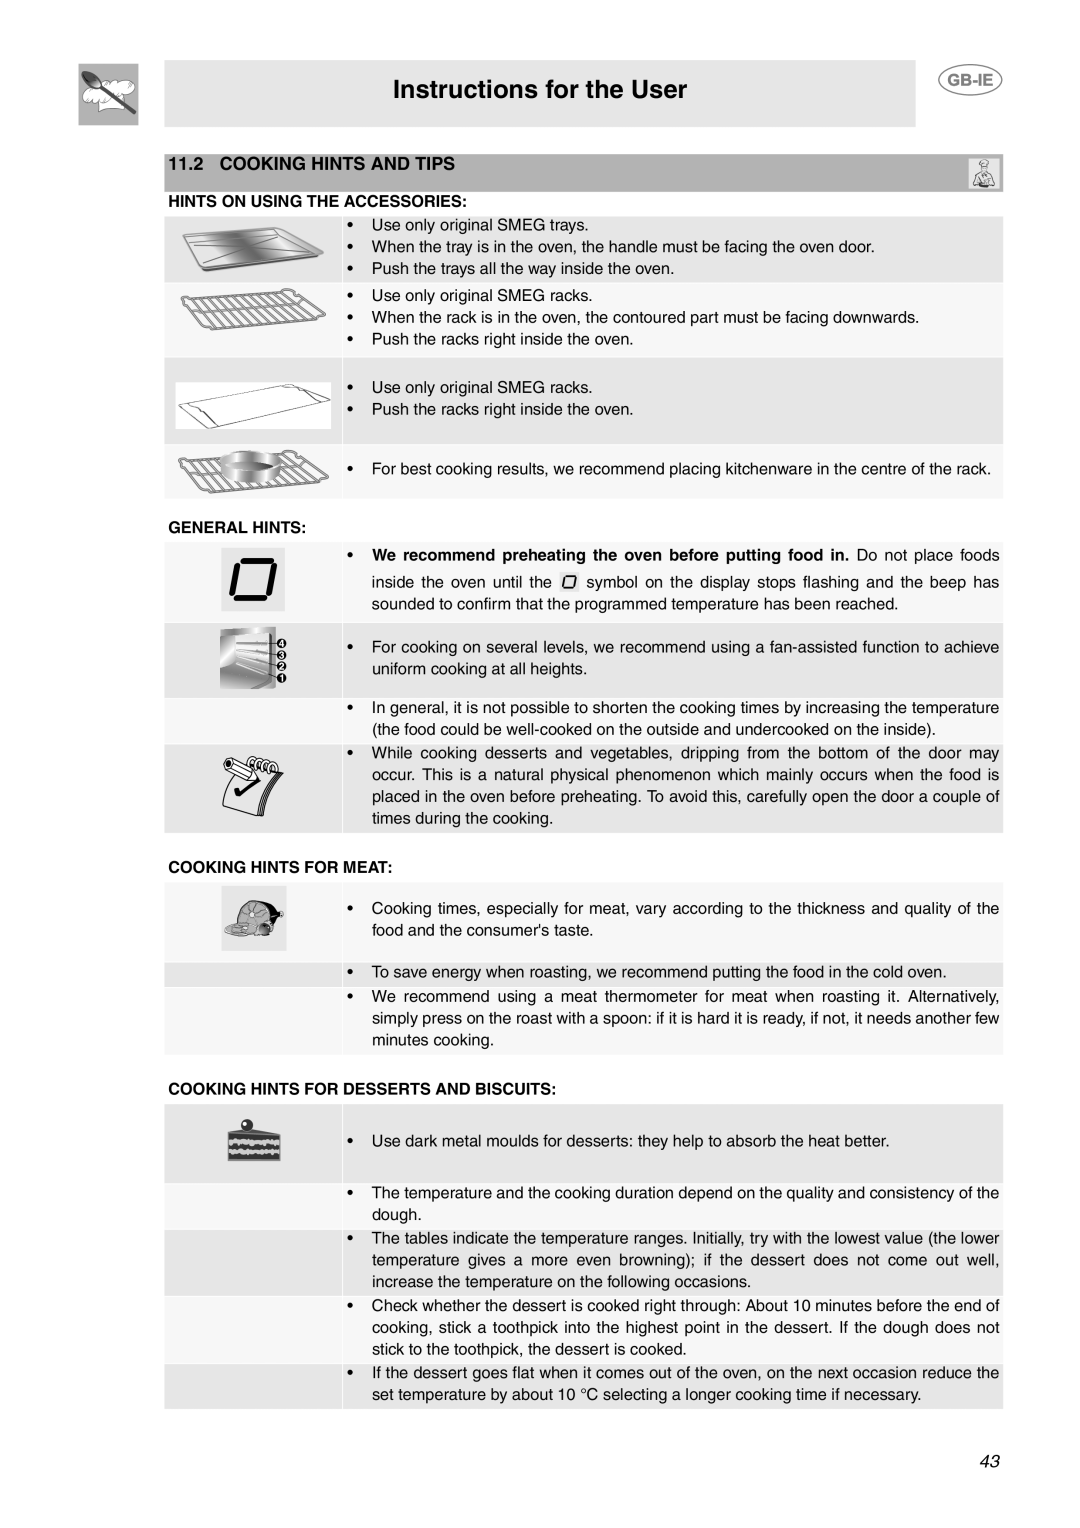 Smeg CE9CMX manual Instructions for the User, Cooking Hints And Tips, Hints On Using The Accessories, General Hints 